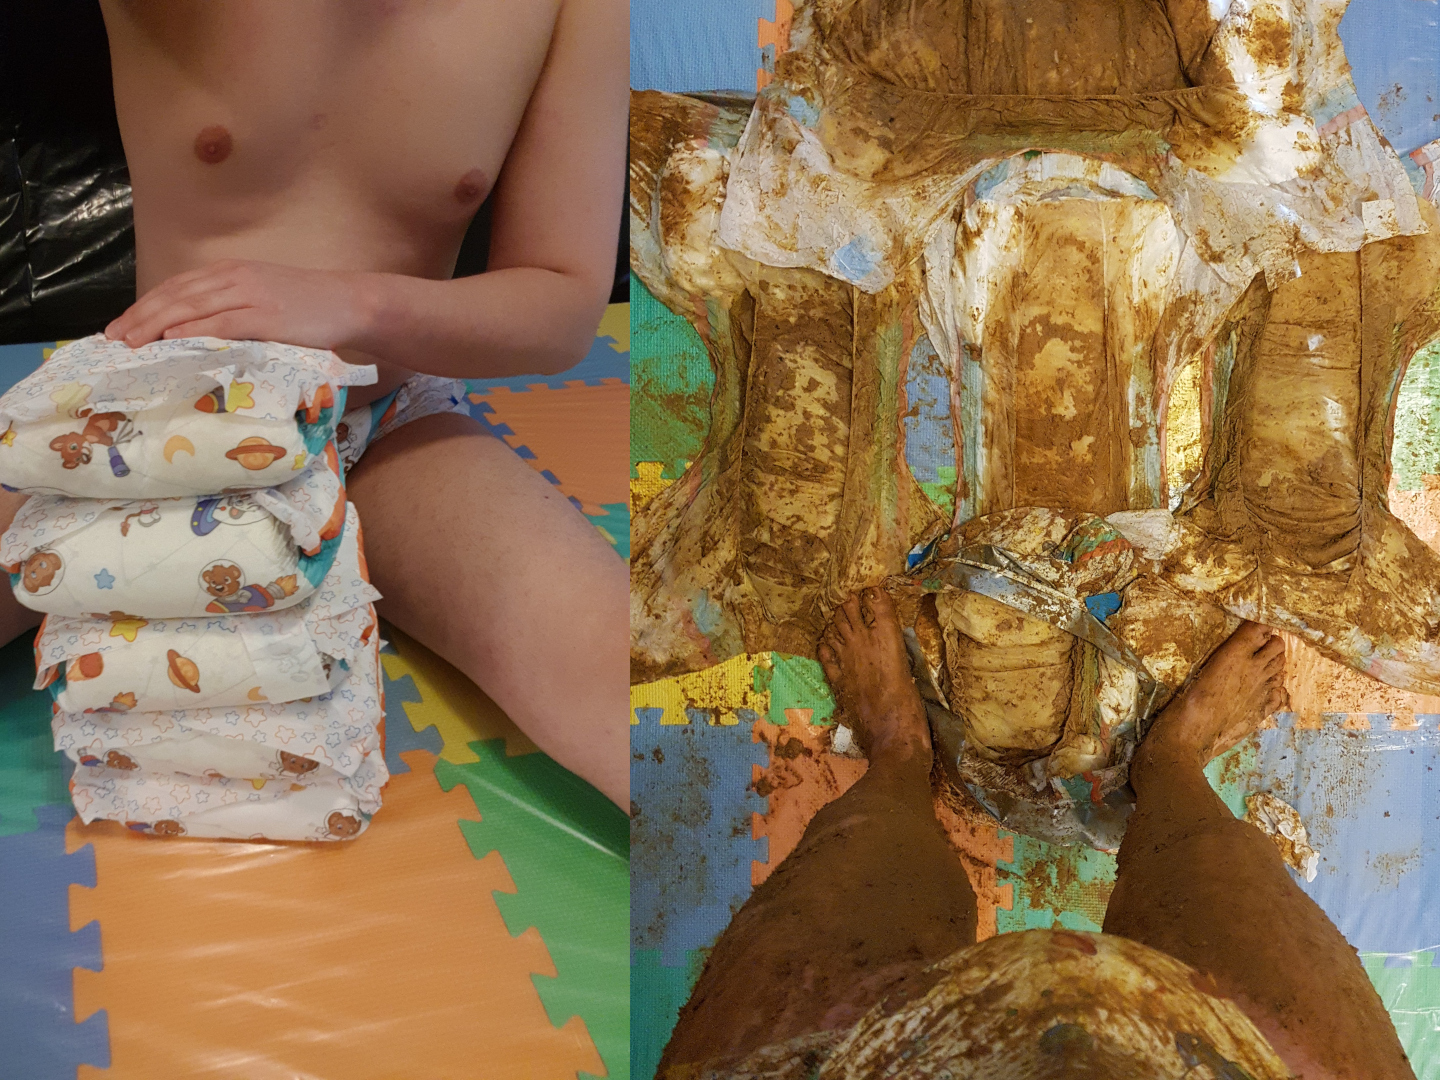 Smearing dirty diapers